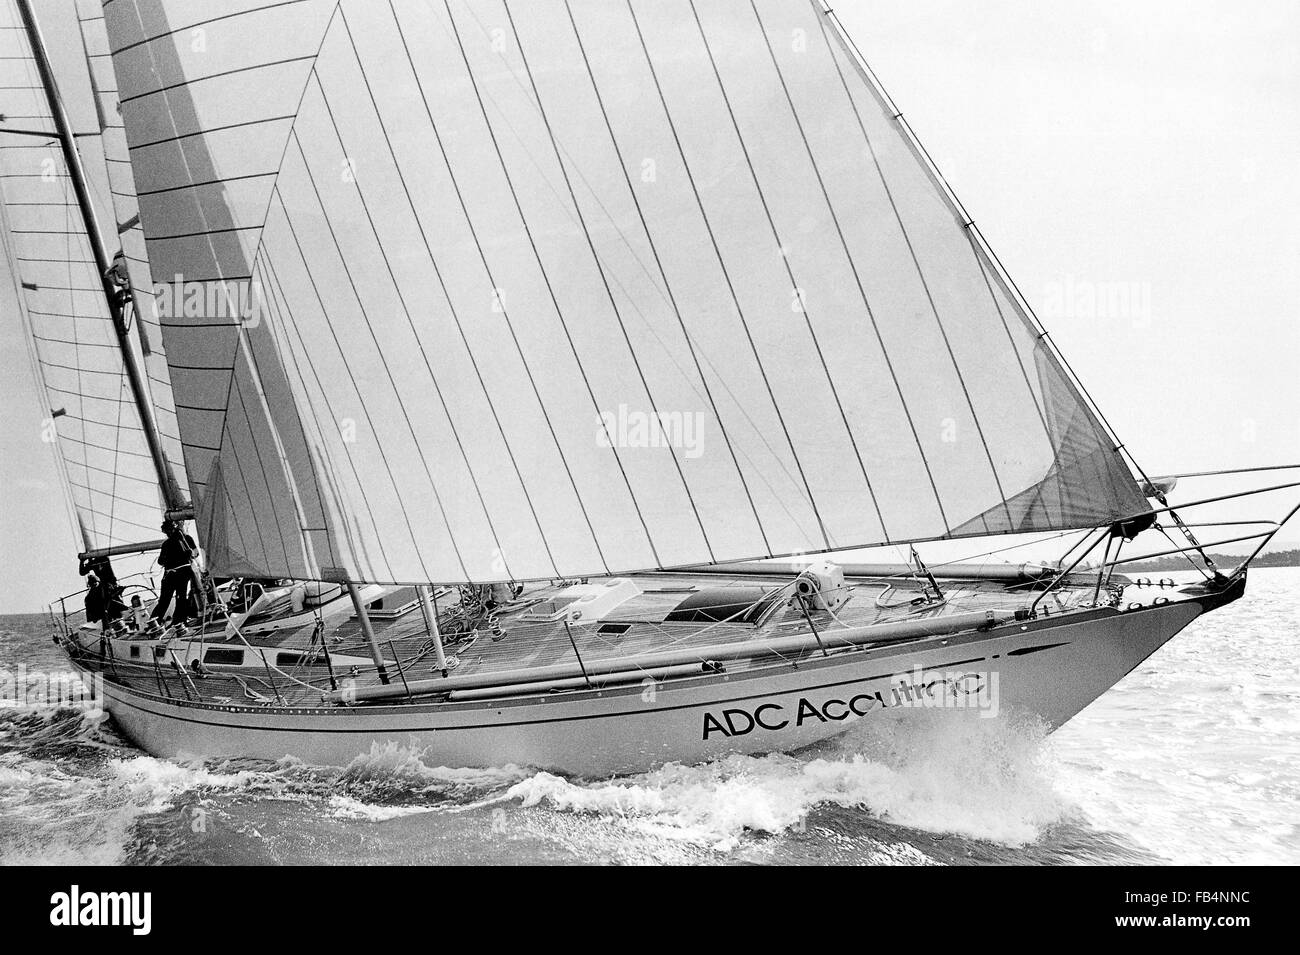 AJAX NEWS PHOTOS - 1977. SOLENT, ENGLAND. - WHITBREAD RACE ENTRY - CLARE FRANCIS (GB) SKIPPERED THE BIG SPARKMAN & STEPHENS DESIGNED 70 FT KETCH ADC ACCUTRAC IN THE 1977/78 WHITBREAD ROUND THE WORLD RACE.  PHOTO:JONATHAN EASTLAND/AJAX  REF:ACCUTRAC_1977_2 Stock Photo